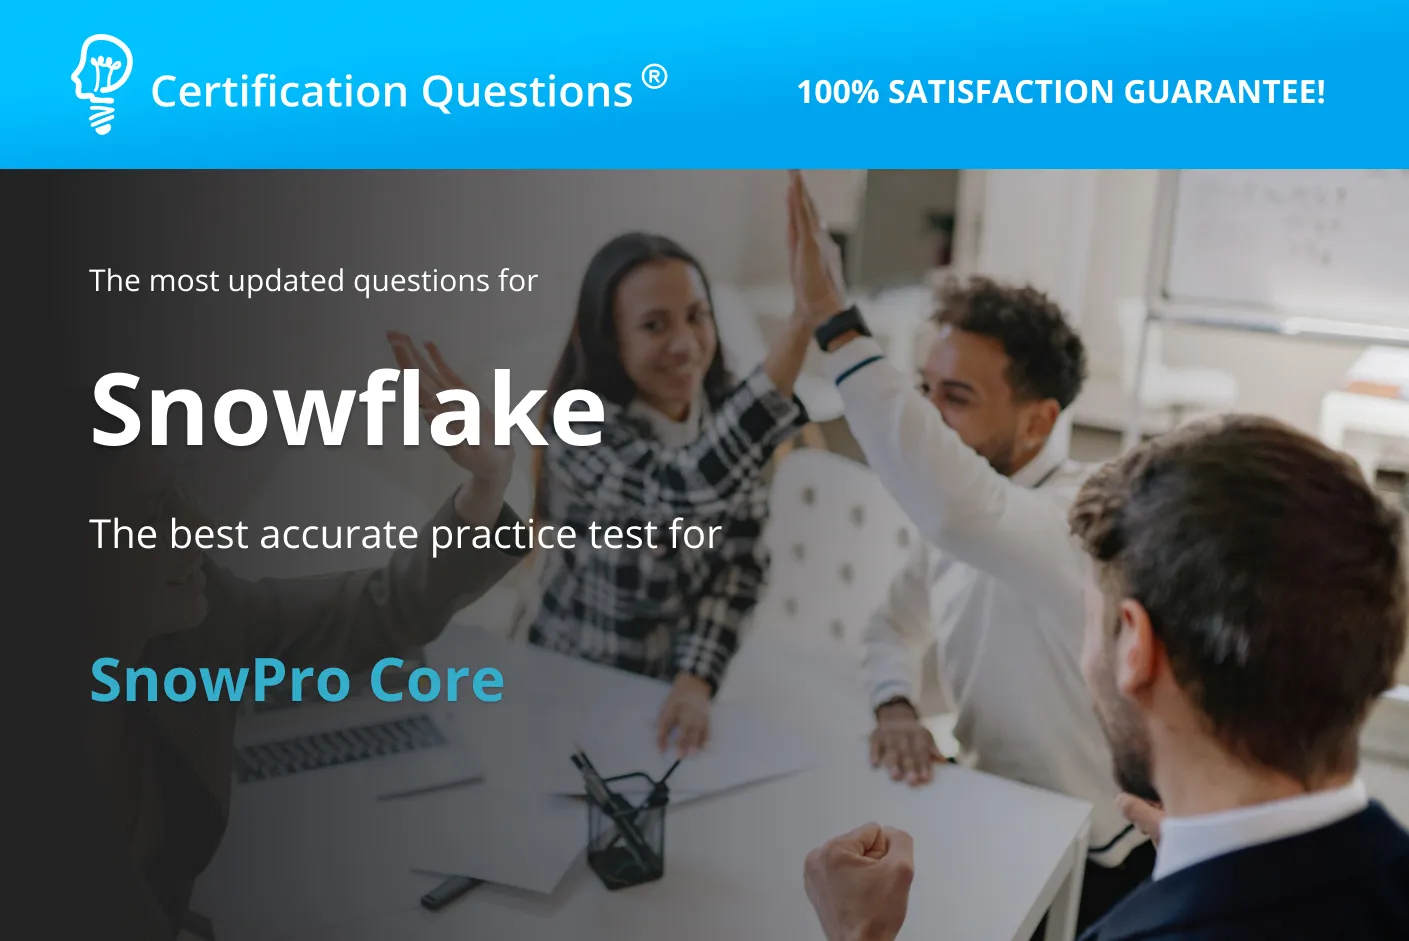 Here is the image for the Snowpro Practice Test in the United States of America